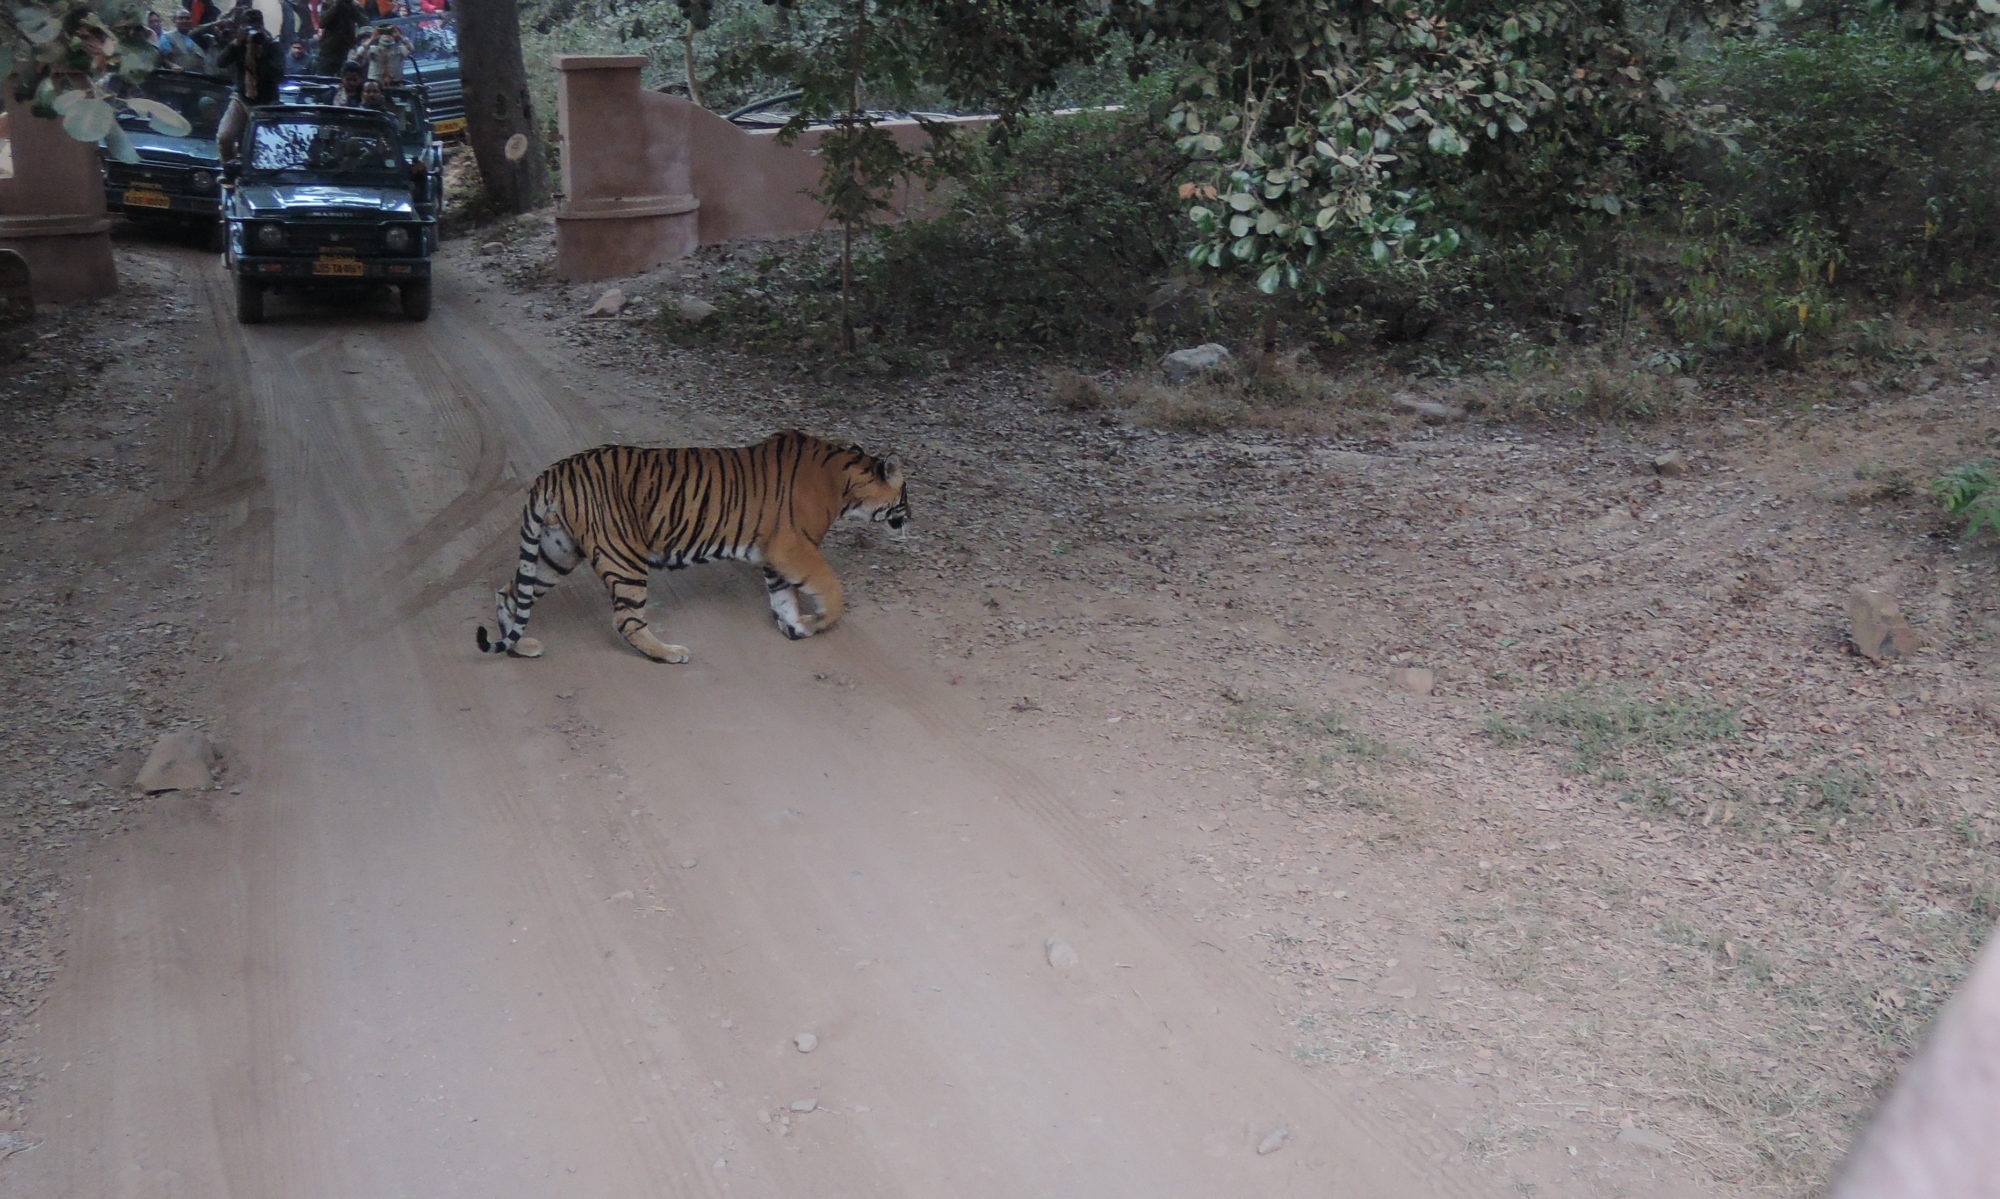 Safari Booking Process in Ranthambore is to be More Transparent